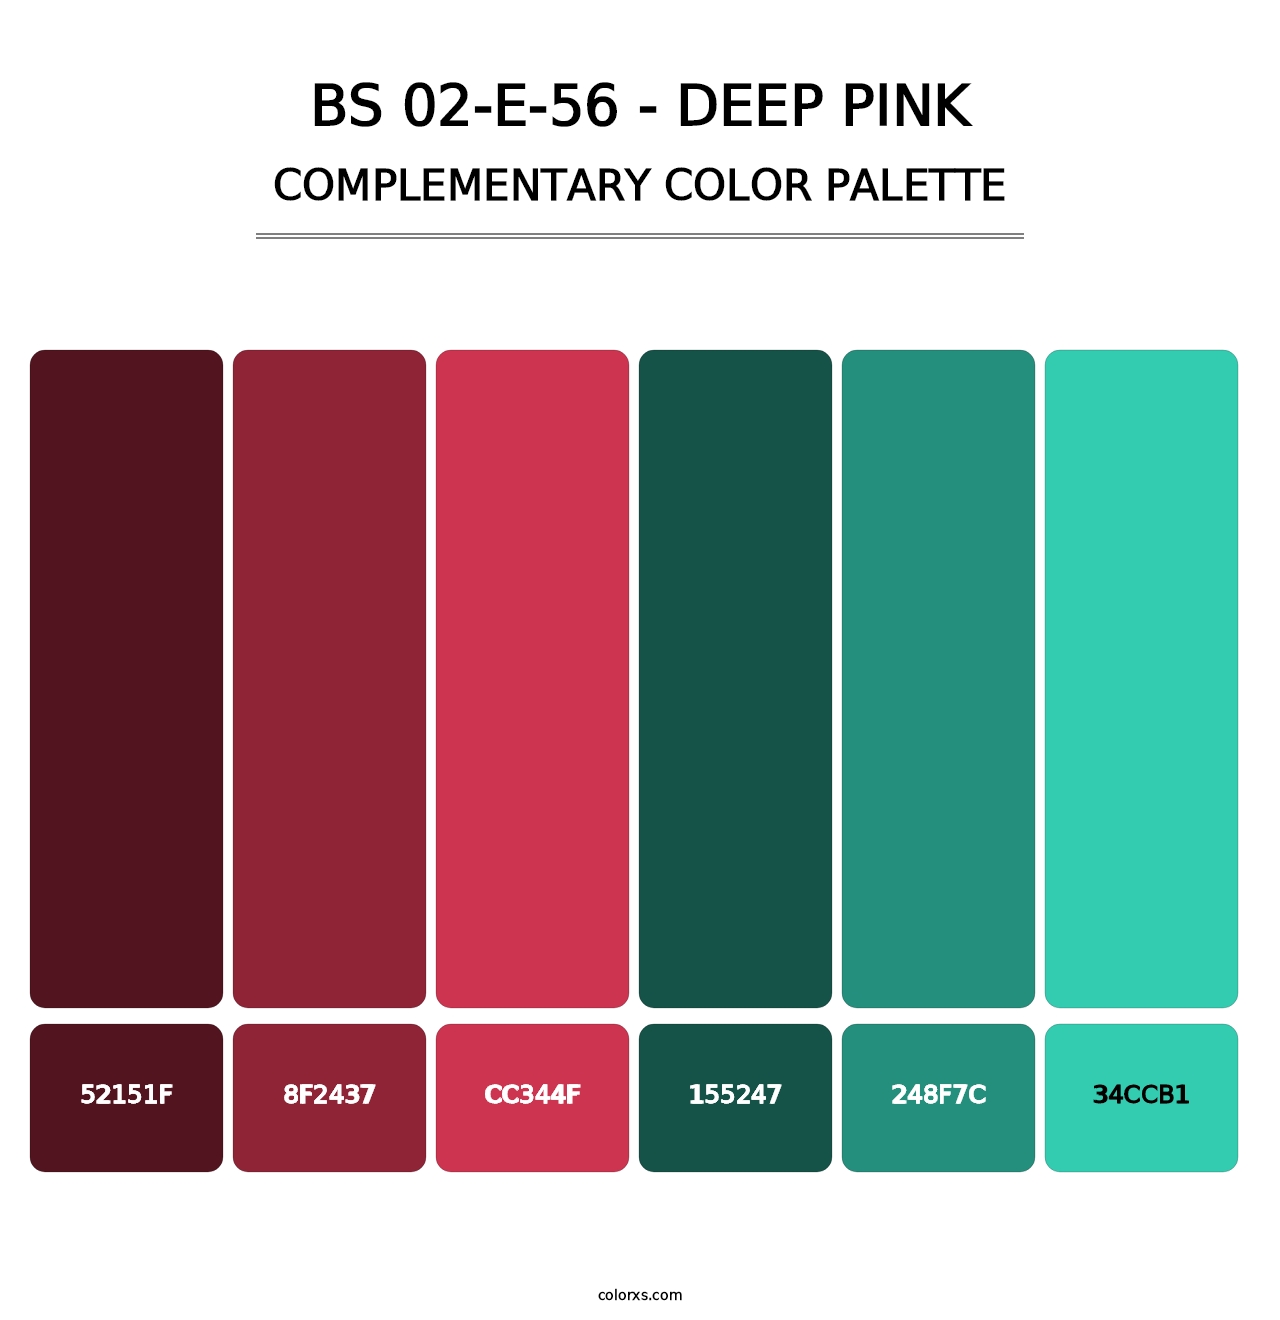 BS 02-E-56 - Deep Pink - Complementary Color Palette